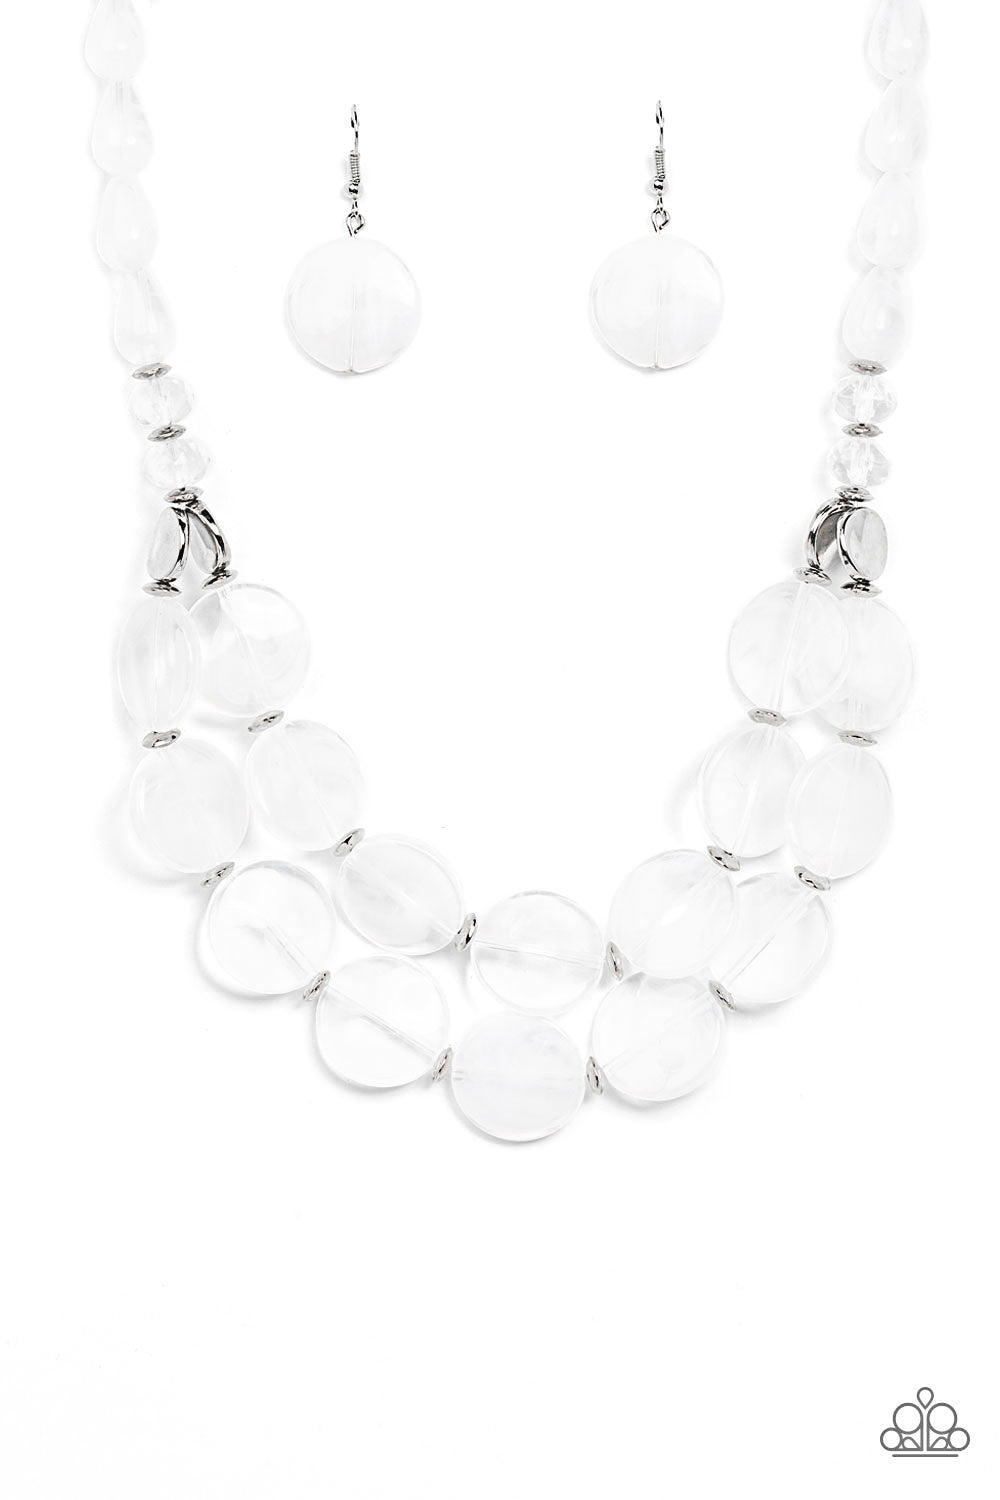 vntermixed with glassy crystal-like beads and shiny silver accents, mismatched cloudy, glassy, and opaque white teardrop and disc beads layer below the collarntermixed with glassy crystal-like beads and shiny silver accents, mismatched cloudy, glassy, and opaque white teardrop and disc beads layer below the collar